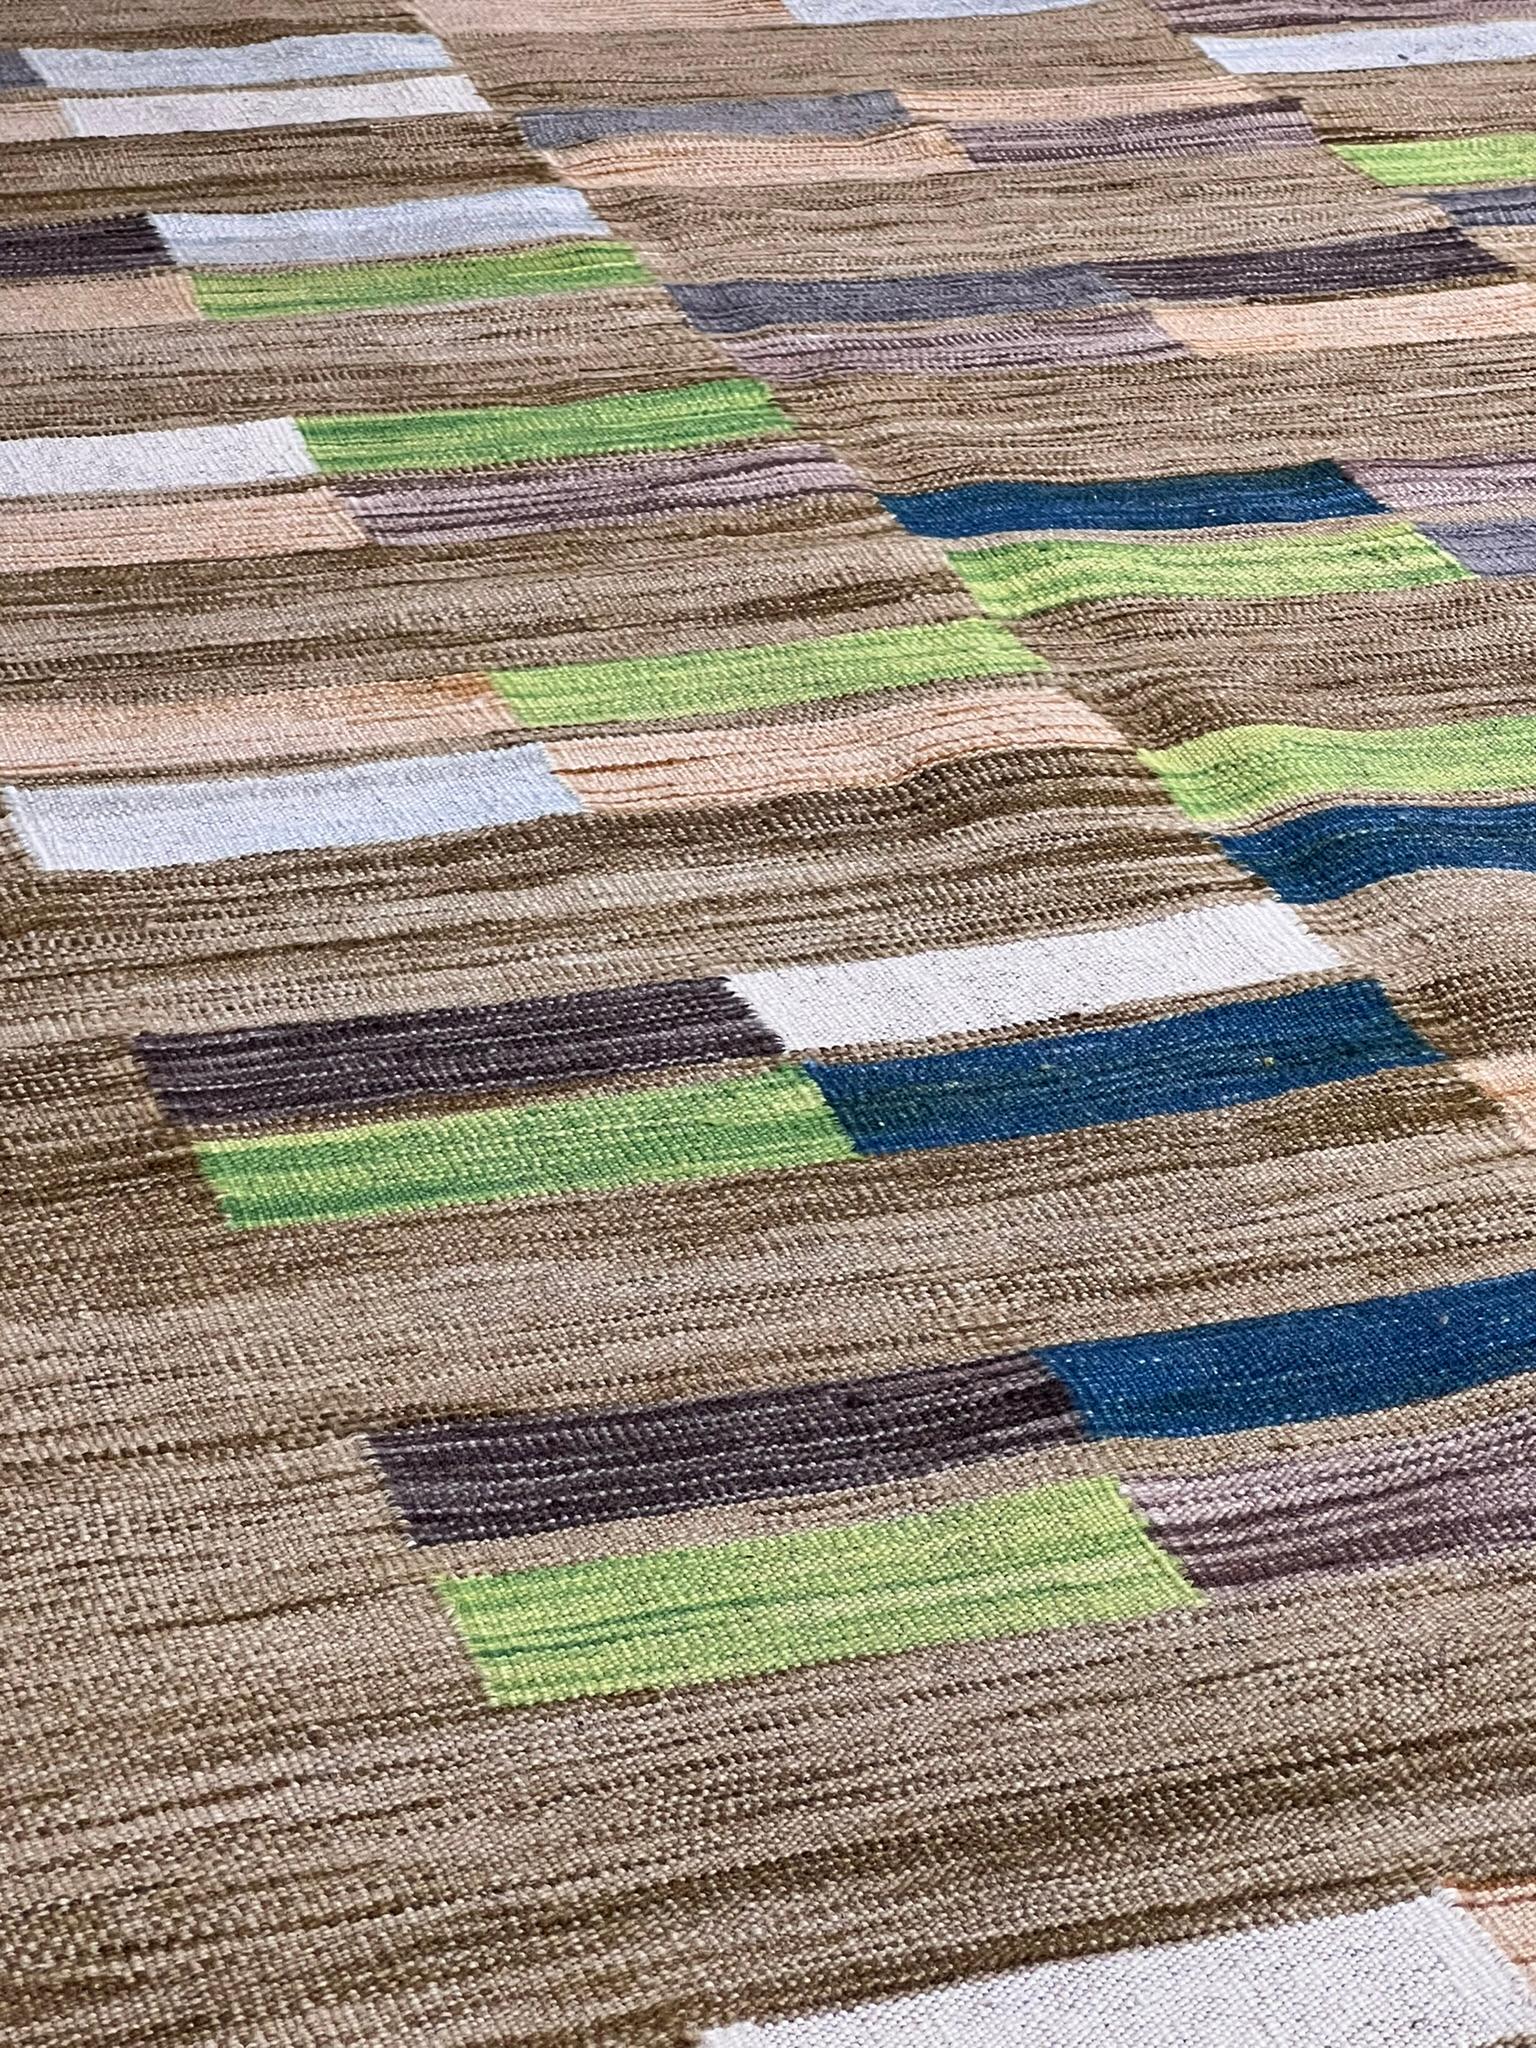 Woven flatweave rug in 1970s style vibrant colors begie blue green In New Condition For Sale In Firenze, IT